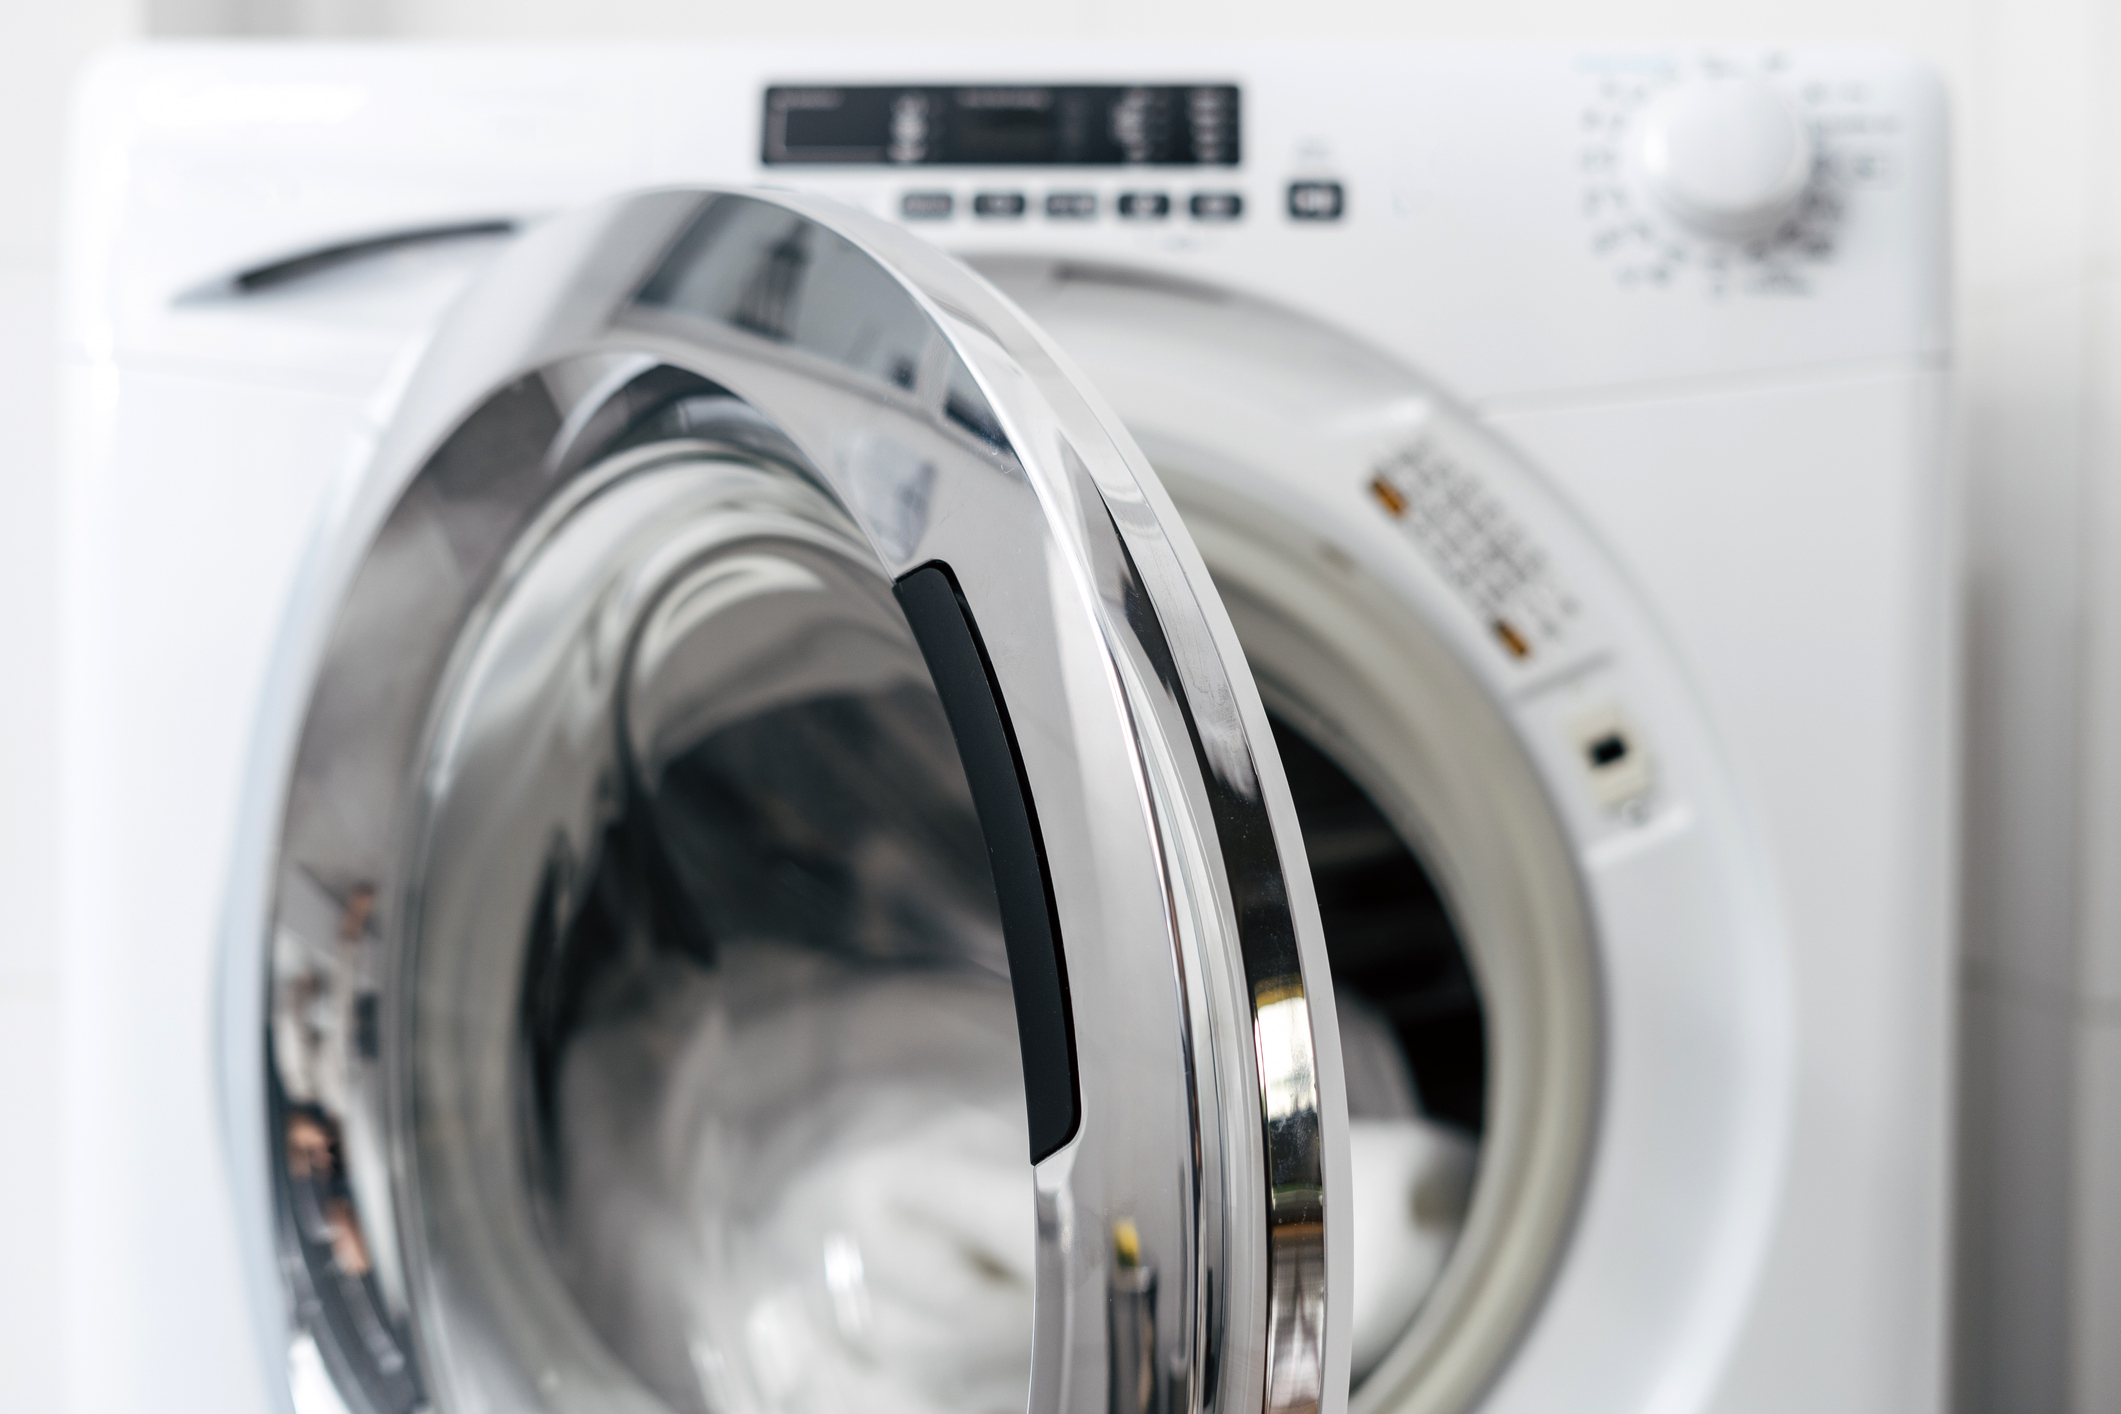 How to Dispose of a Washer and Dryer - Life Storage Blog